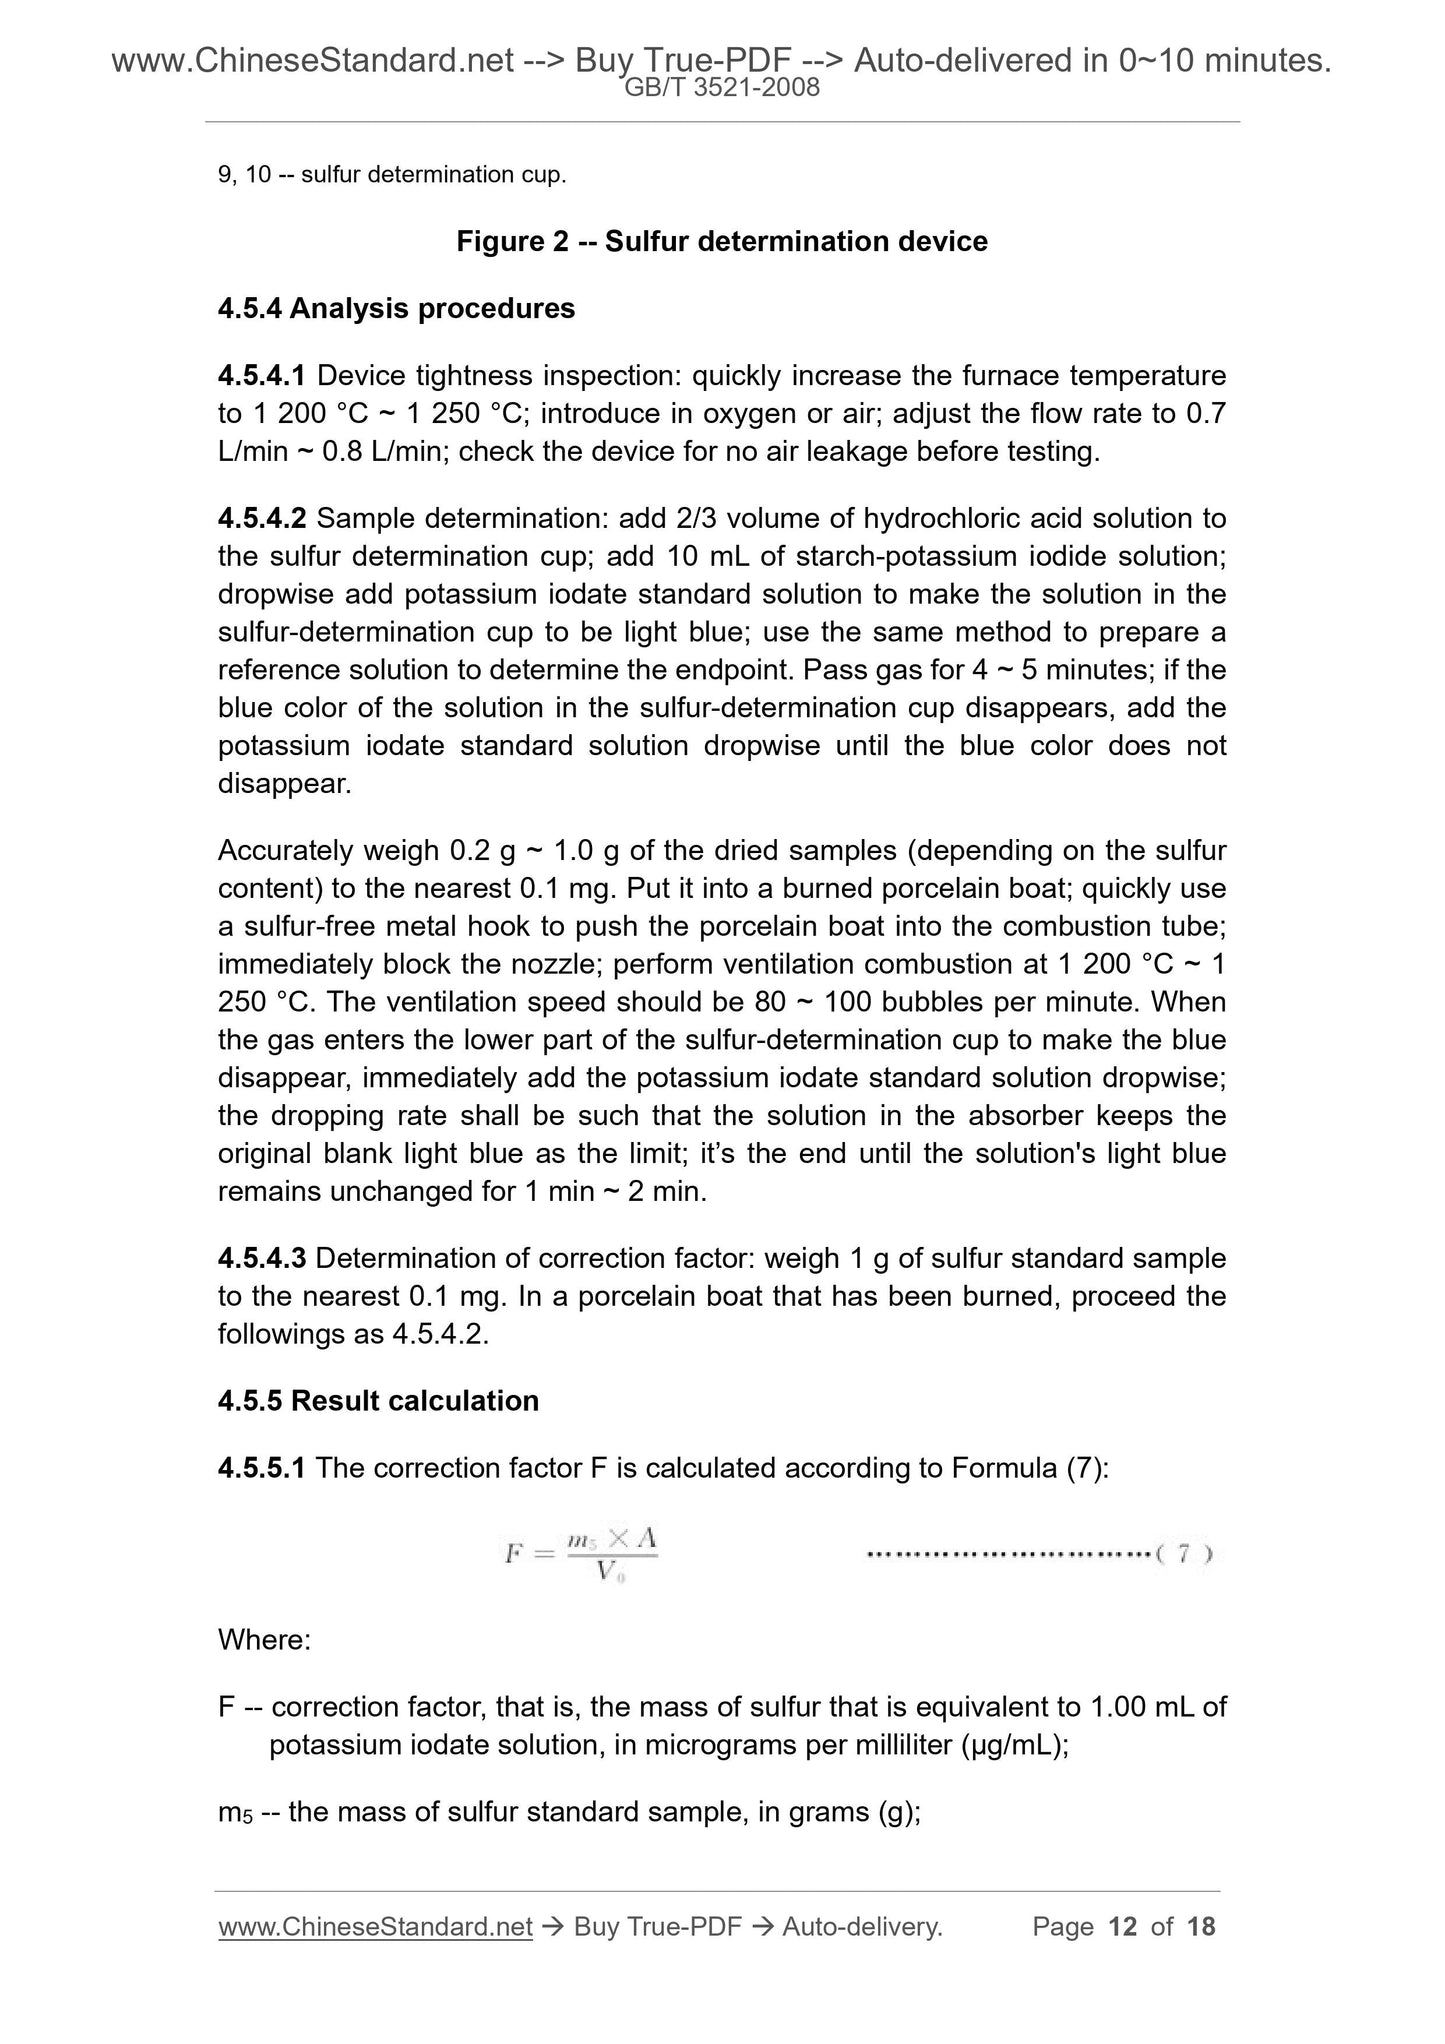 GB/T 3521-2008 Page 6